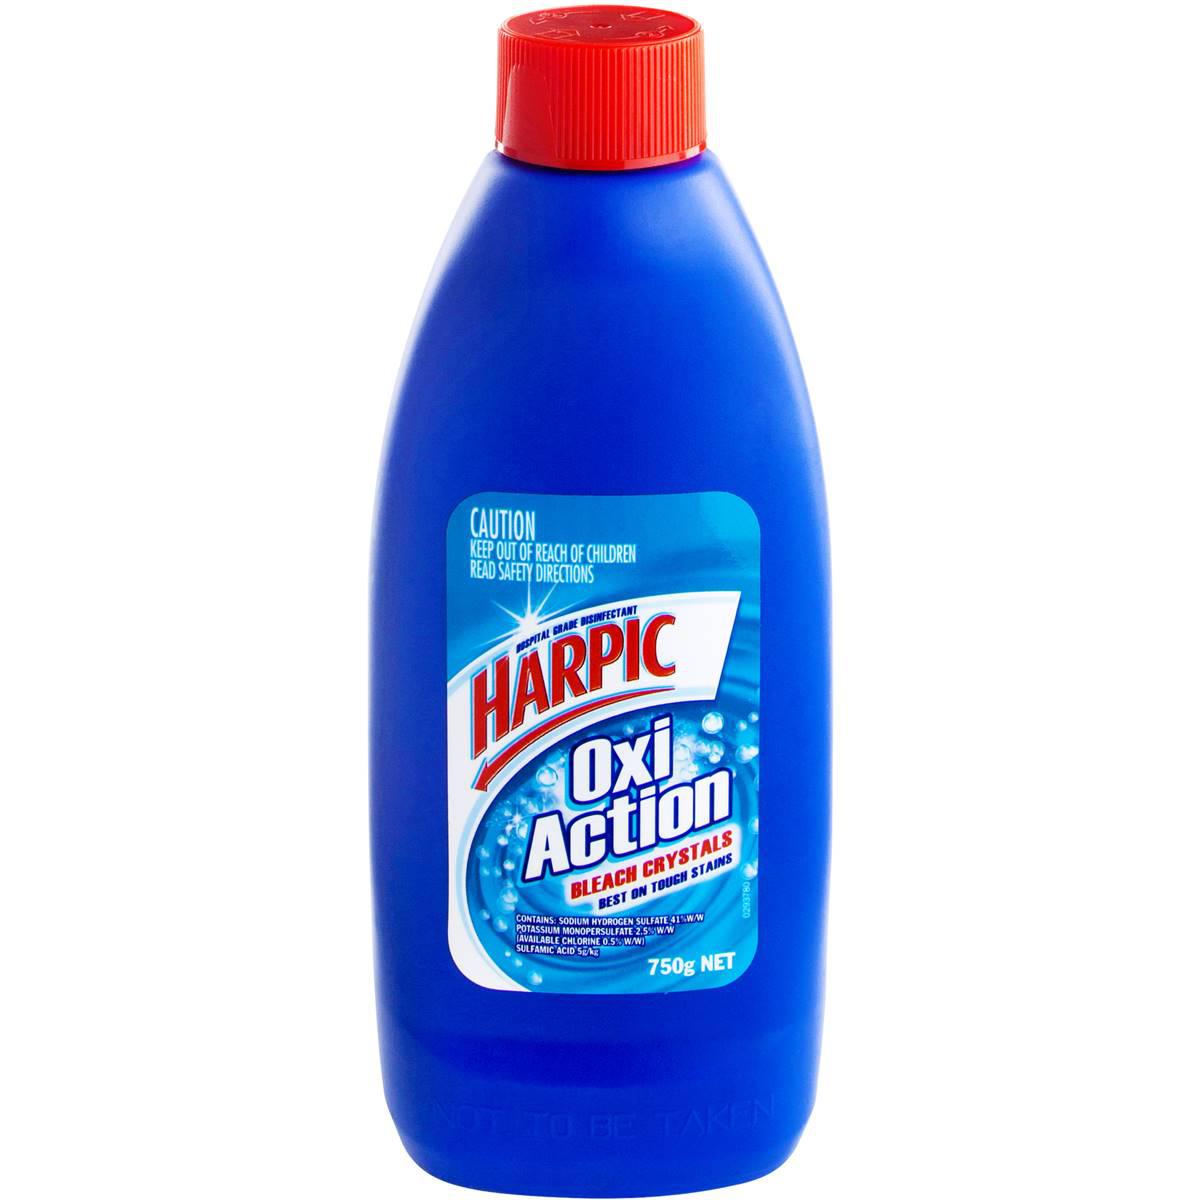 Harpic Bleach Crystals Oxy Action Cleaner Oxi Action Crystal 750g